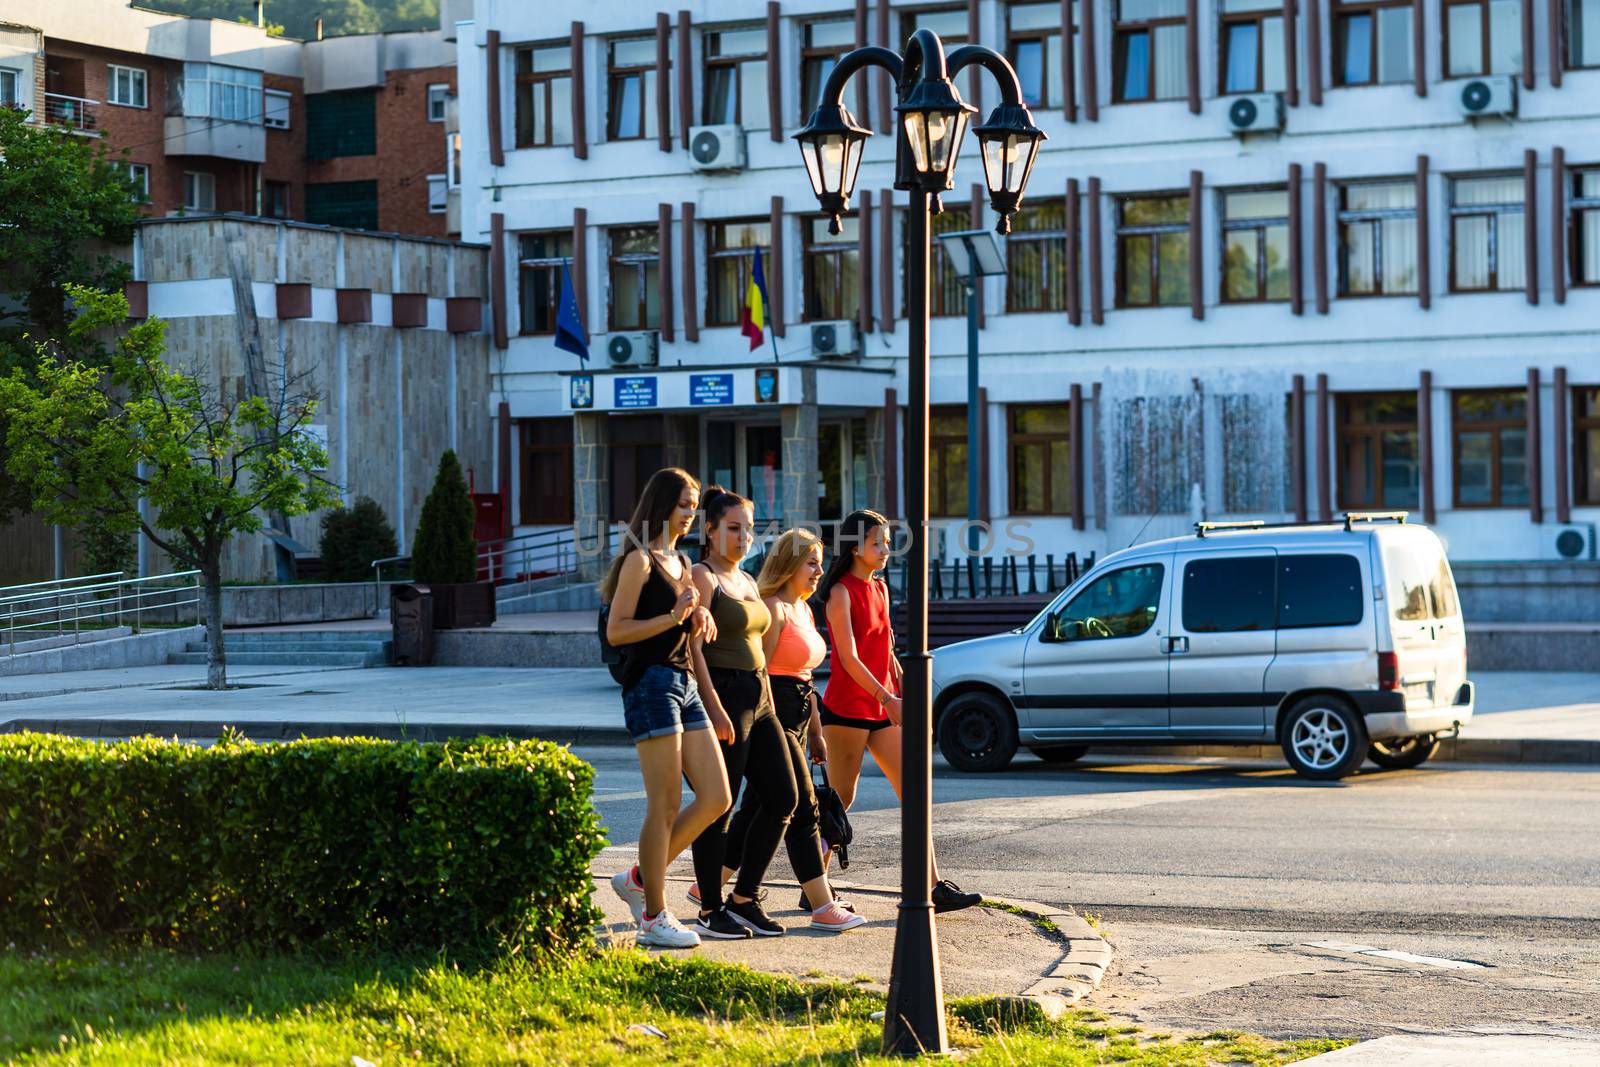 Group of teenagers walking on a street in Orsova, Romania, 2020